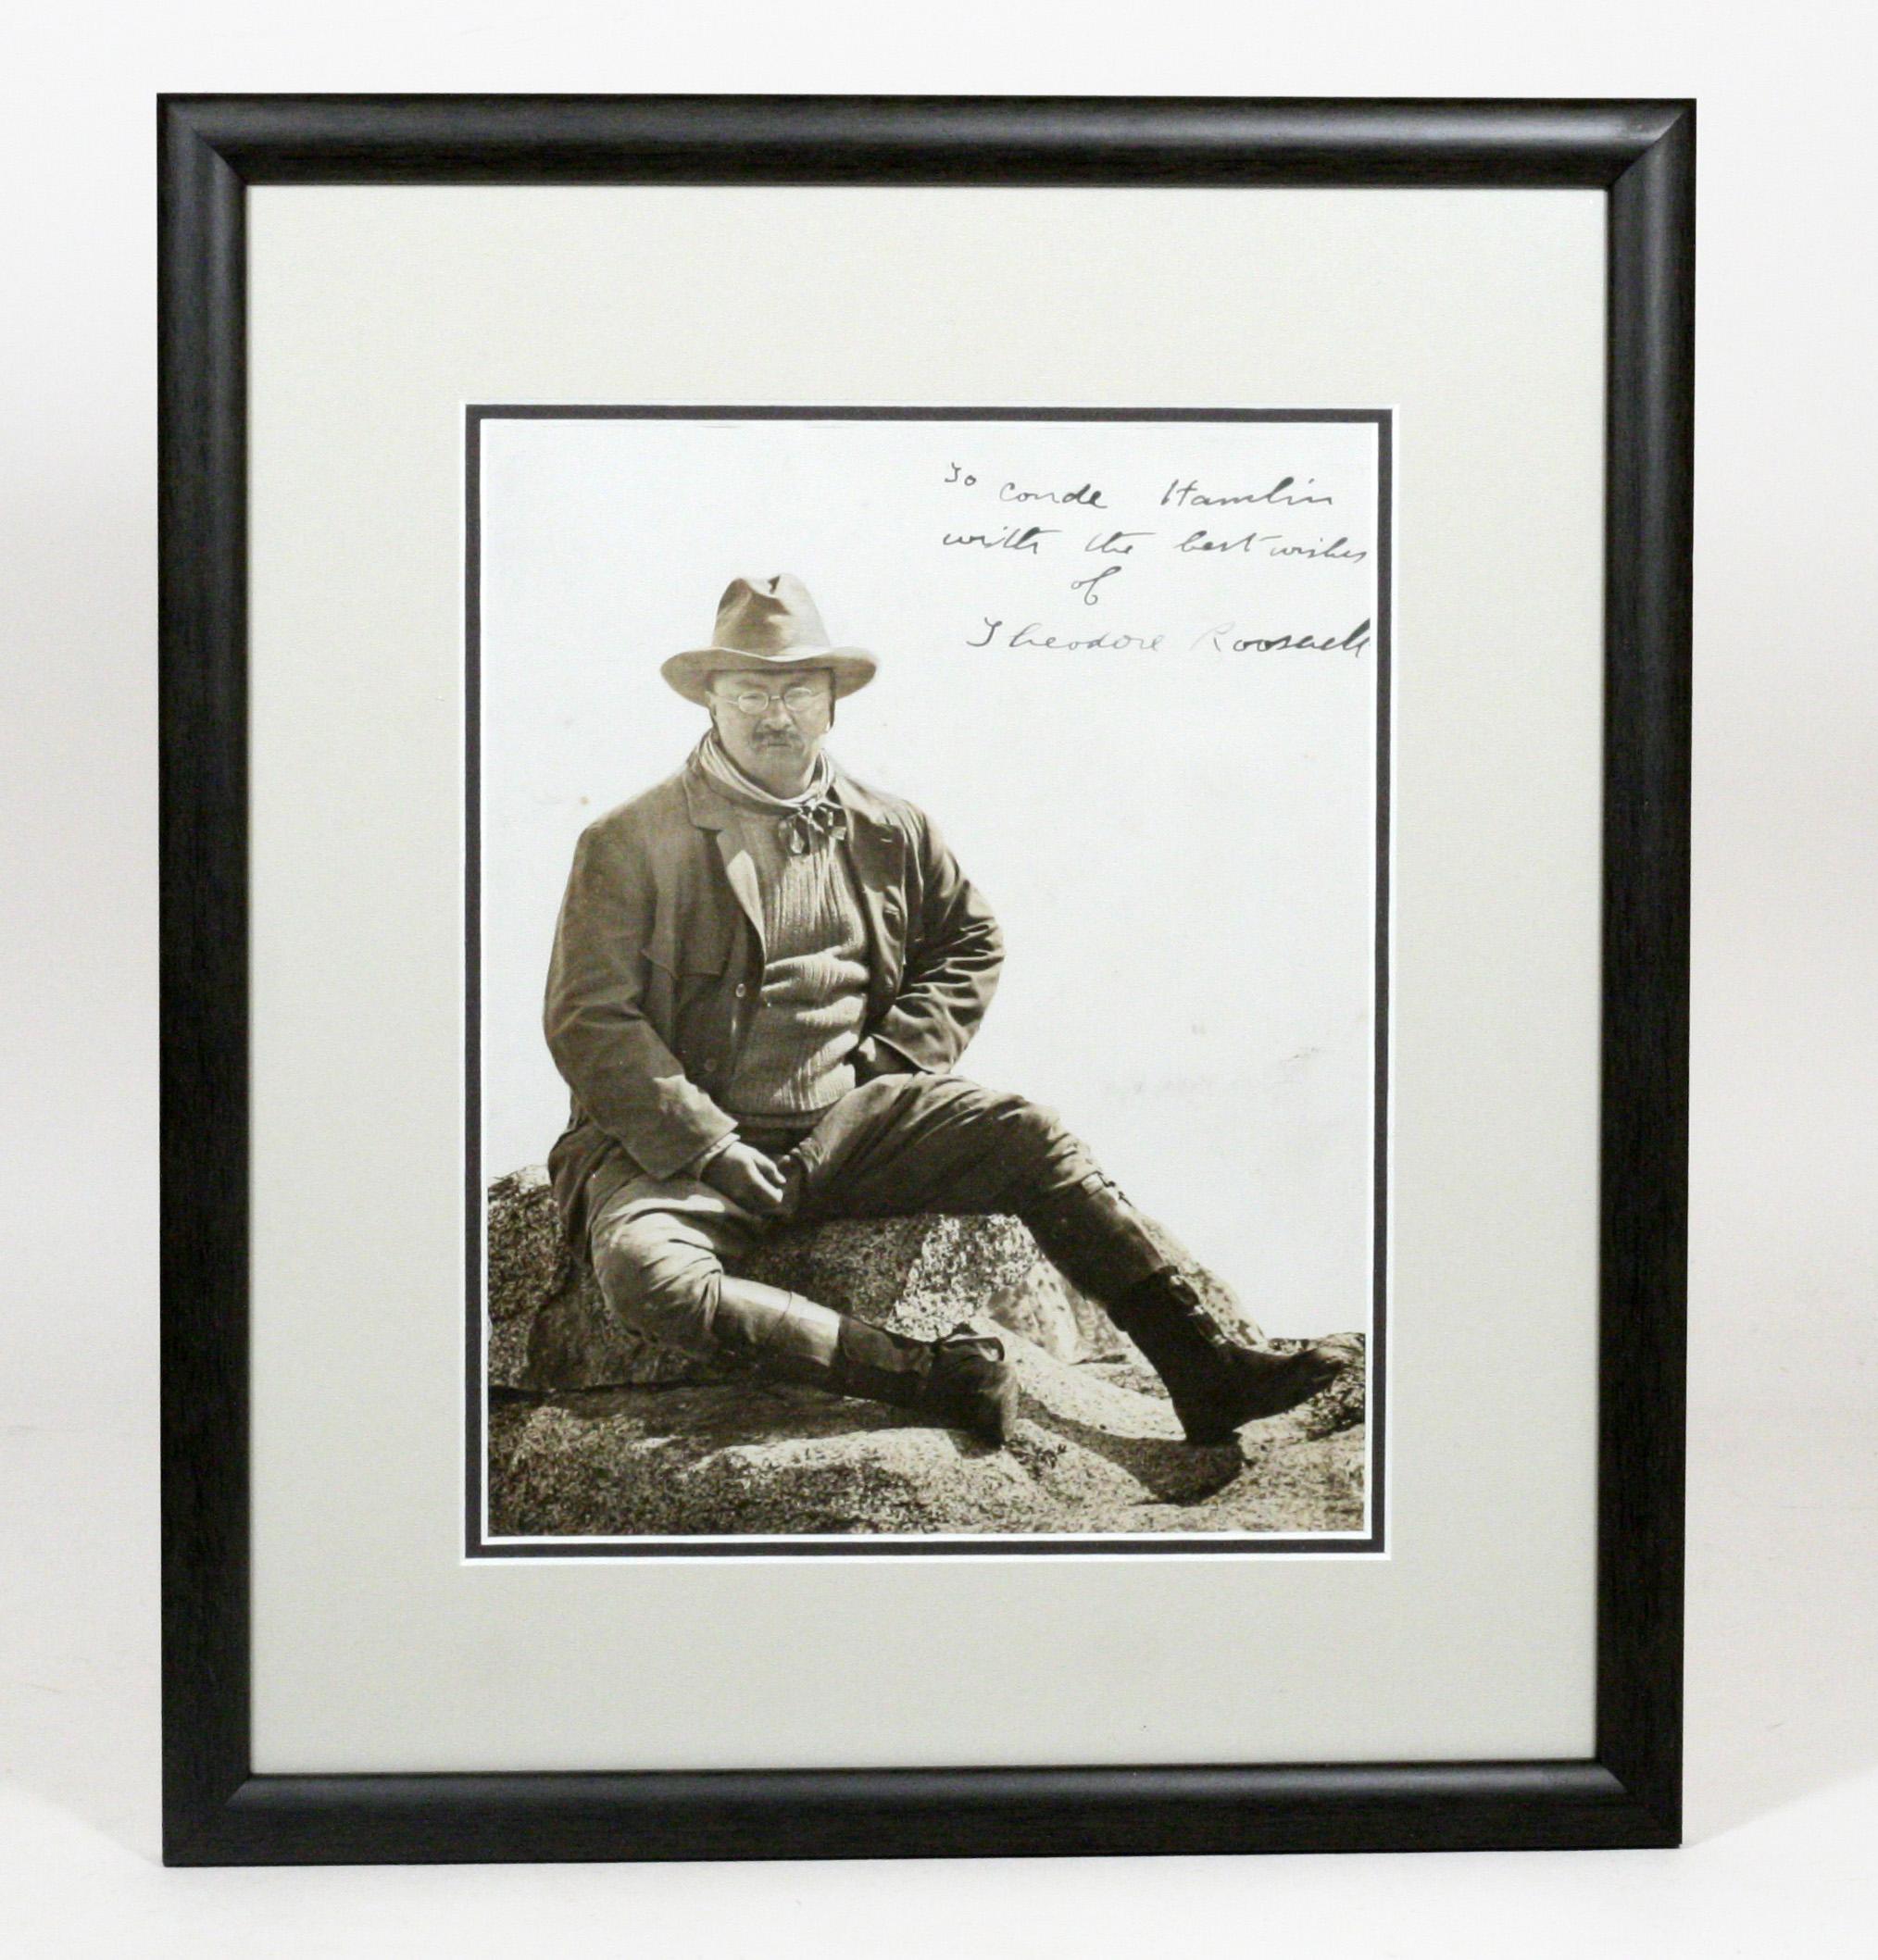 Theodore Roosevelt In Yosemite - The Birth Of The Conservation Movement. Outstanding Signed Photograph Of Roosevelt As President On Glacier Point, Yosemite; Signed And Inscribed On The Image: “to Conde Hamlin / With The Best Wishes / Of / Theodore